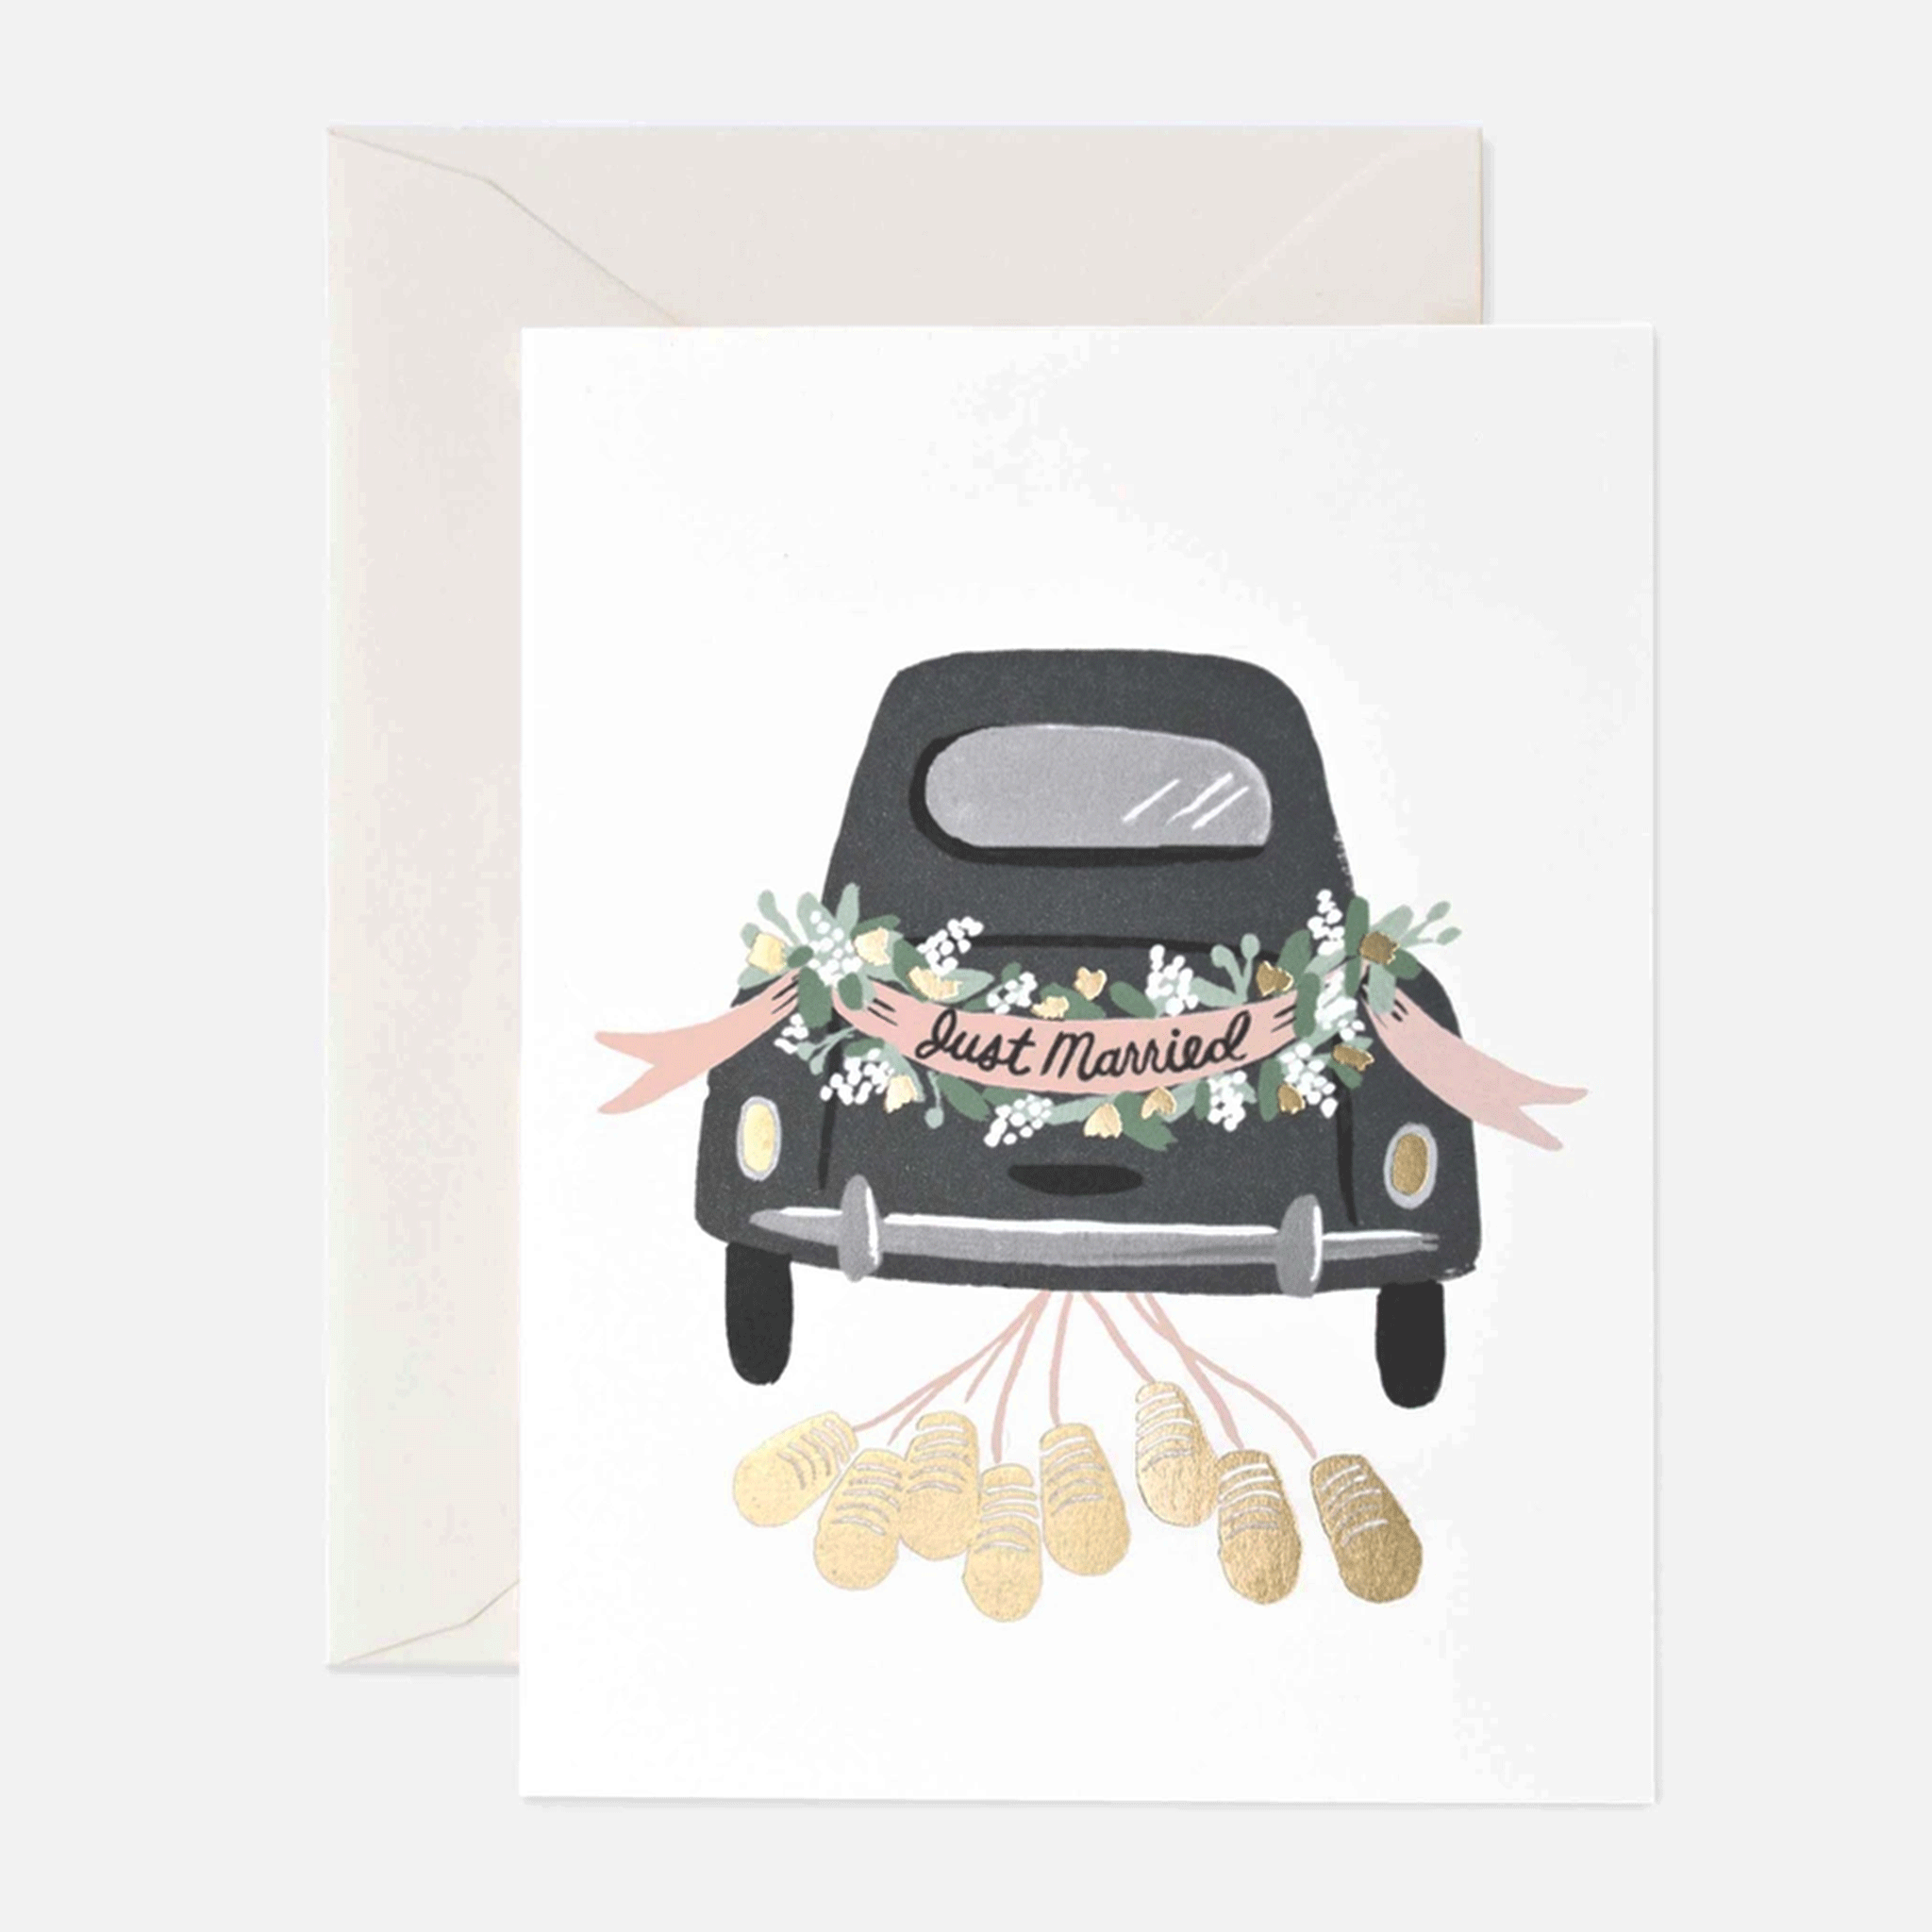 On a white background is a white card with a black getaway card decorated with a banner that reads, "Just Married" and greenery around it as well as gold foiled cans coming from the bottom of the car. 